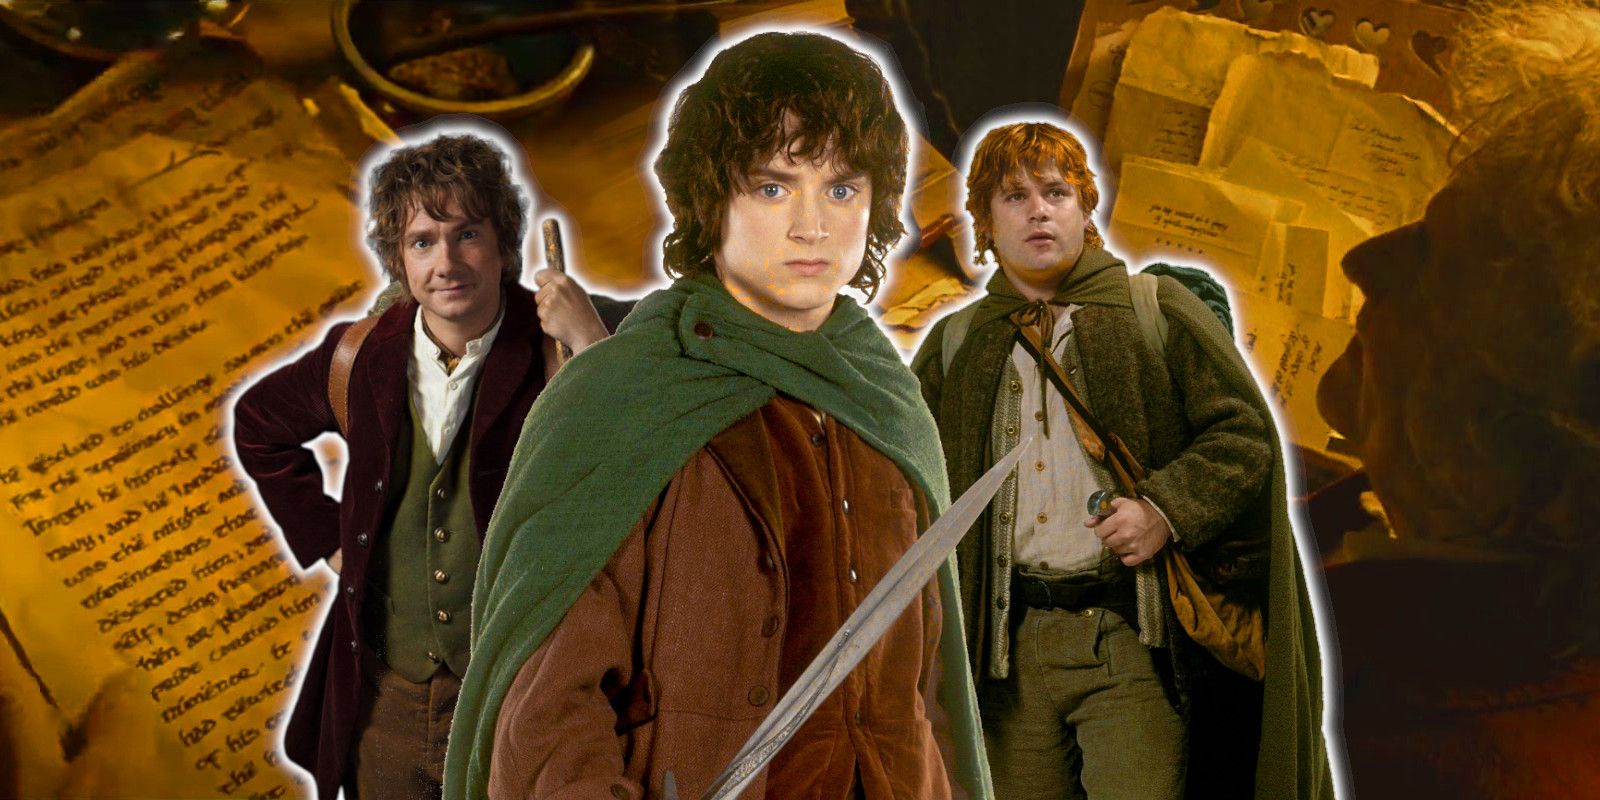 Bilbo from The Hobbit and Frodo and Sam from The Lord of the Rings in front of handwritten manuscripts